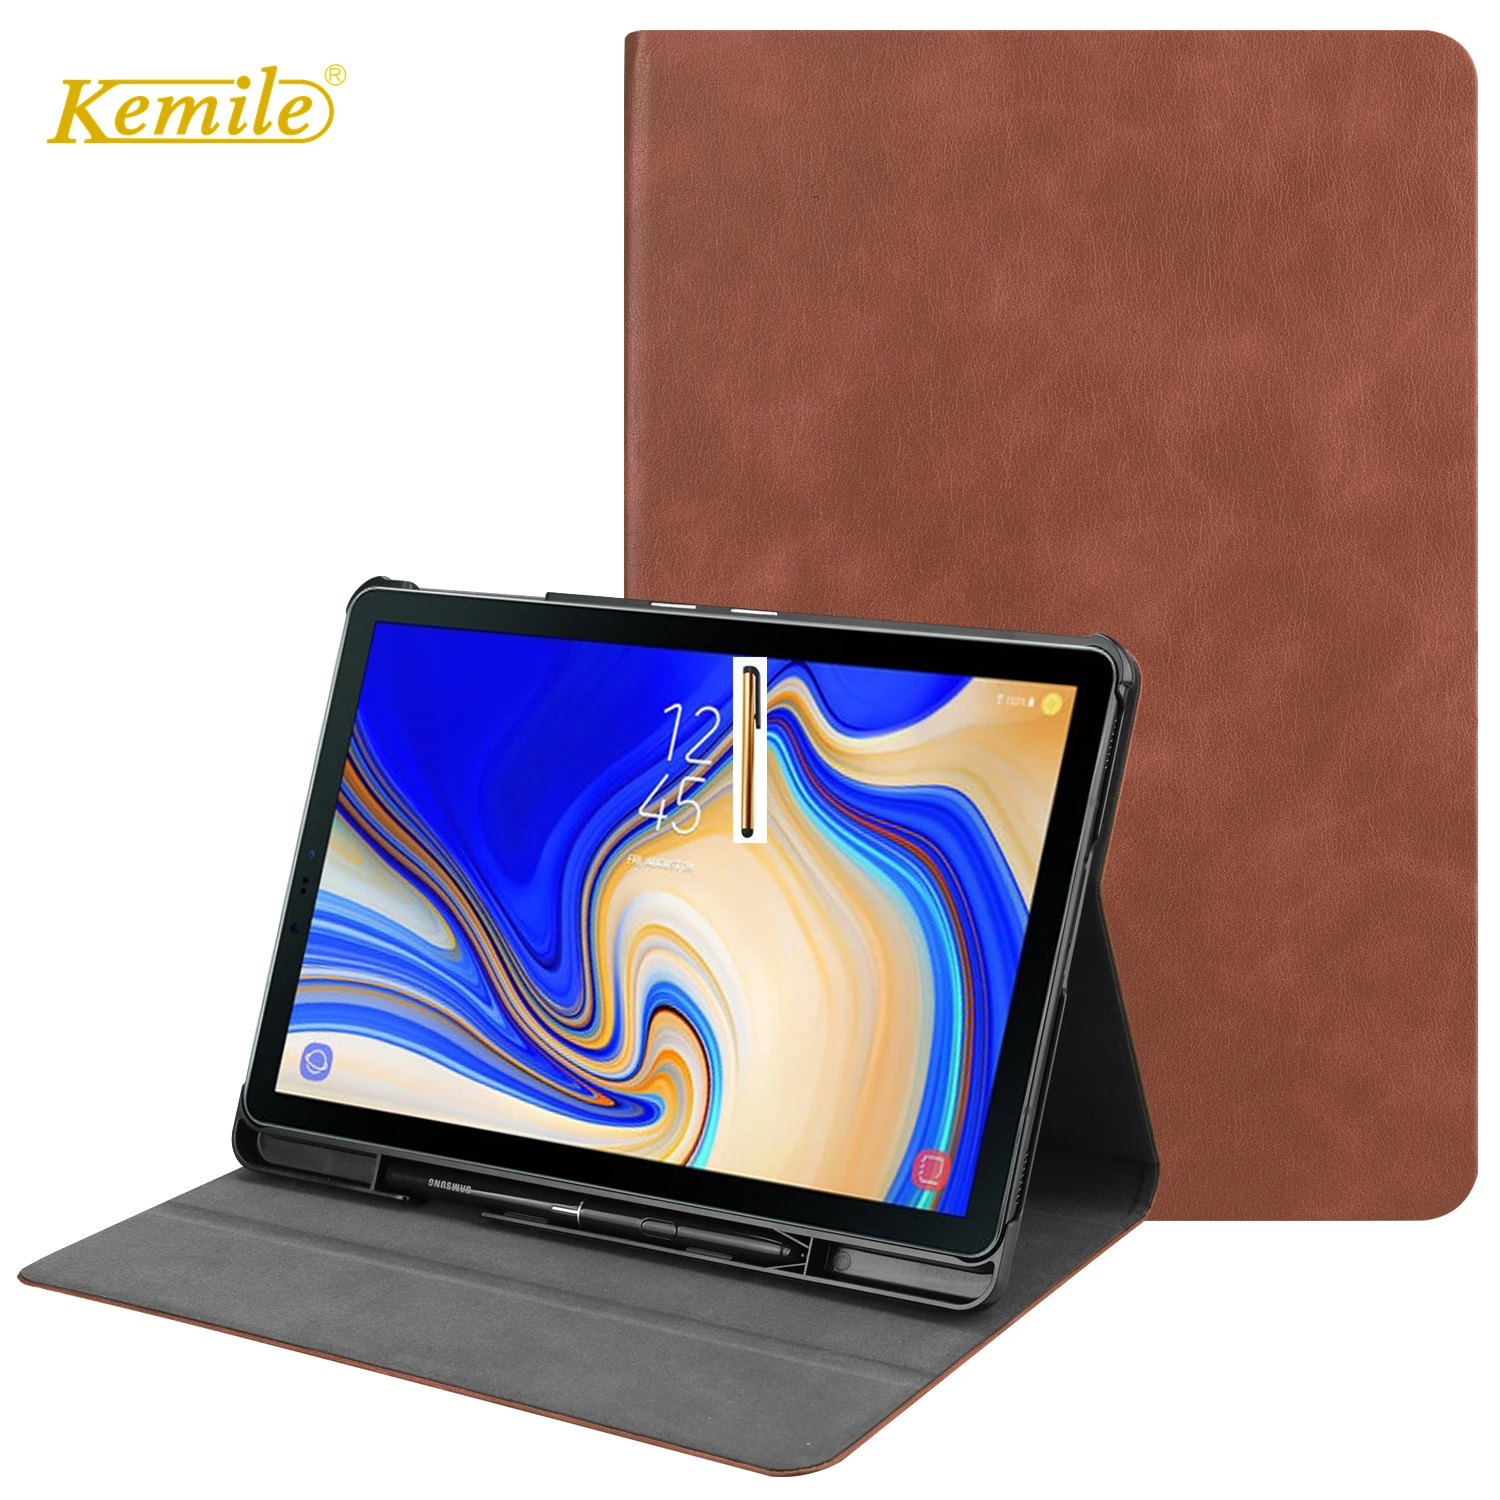 Kemile Ultra slim Leather Case for Samsung Galaxy Tab S4 T830 T835 SM-T835 SM-T835 10.5'' Tablet W S pen holder leather Cover